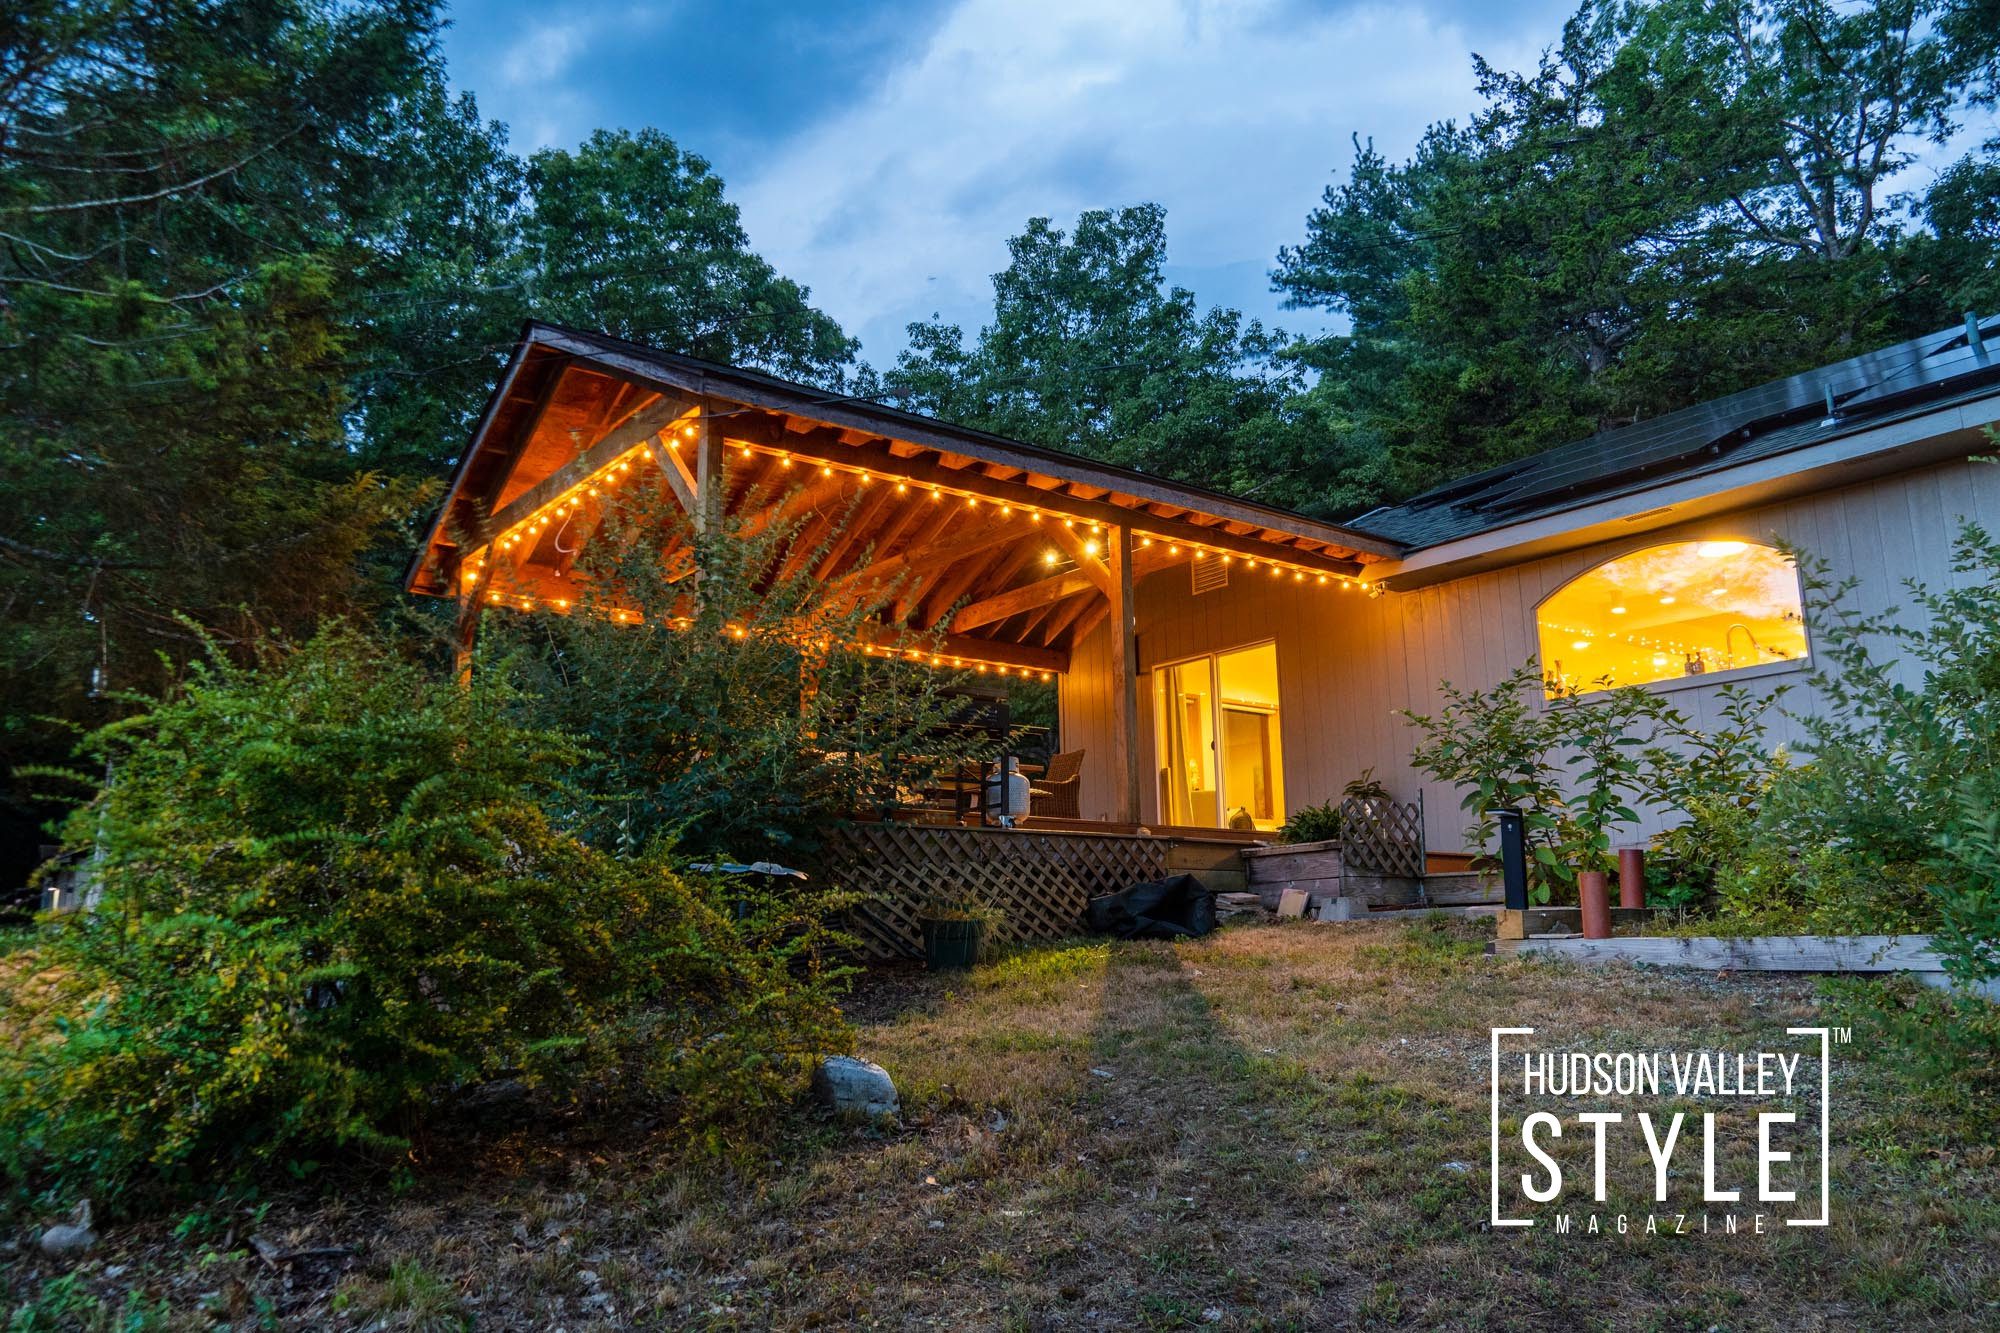 Discover The Secluded Mountaintop Getaway: A Modern Rustic Cabin in the Hudson Valley – Presented by Alluvion Vacations